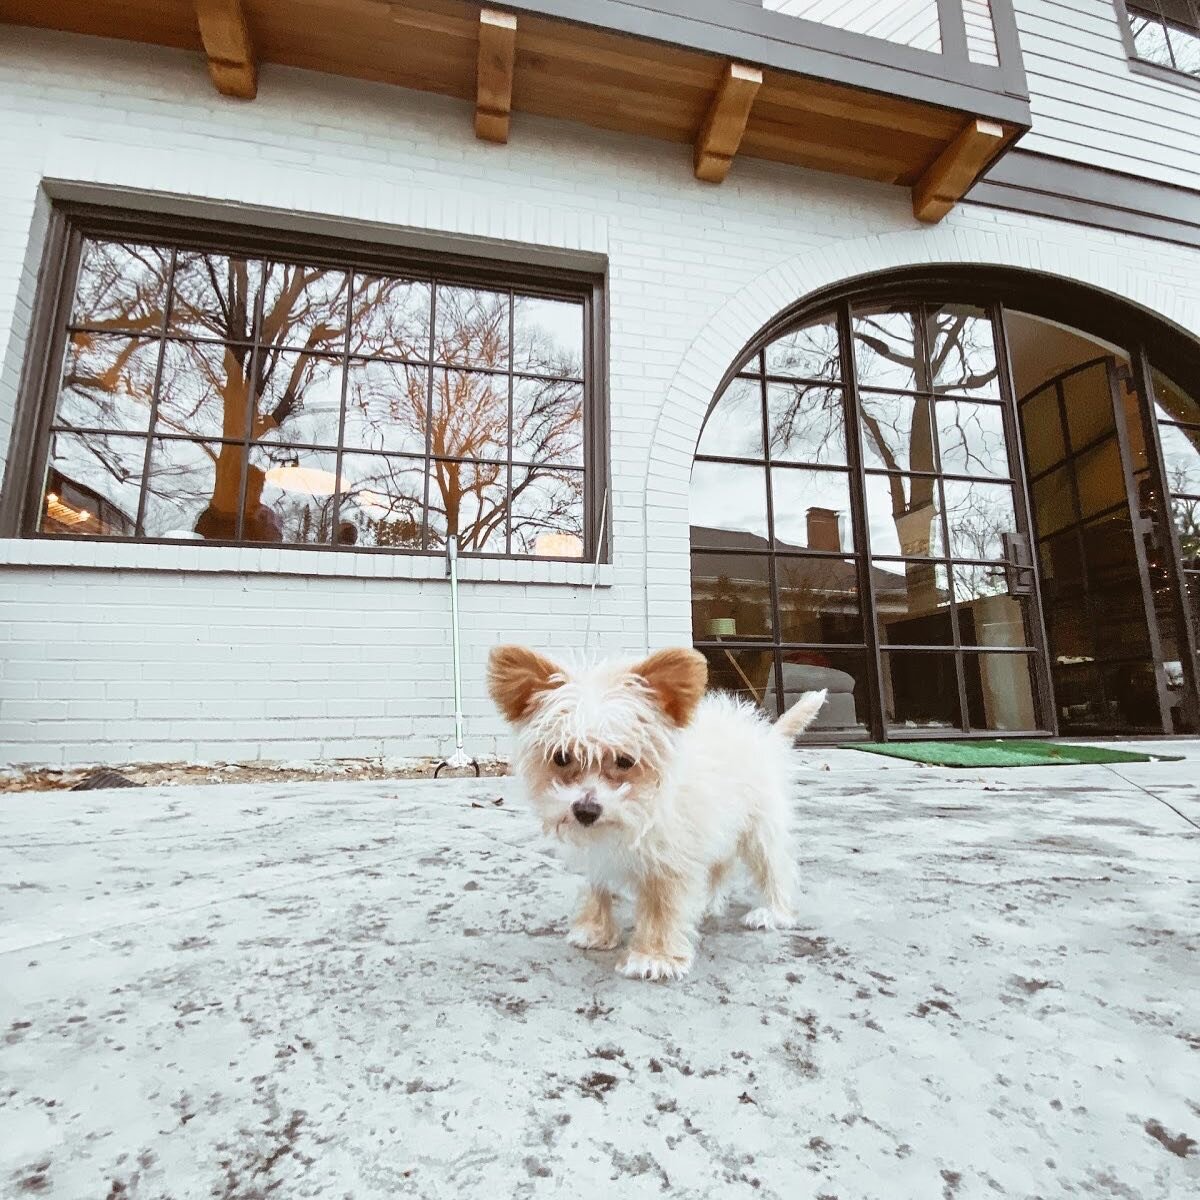 The best site visits are the ones where furry friends are present 🐶✨

#HomesbyNorthside #NorthsideBuilders